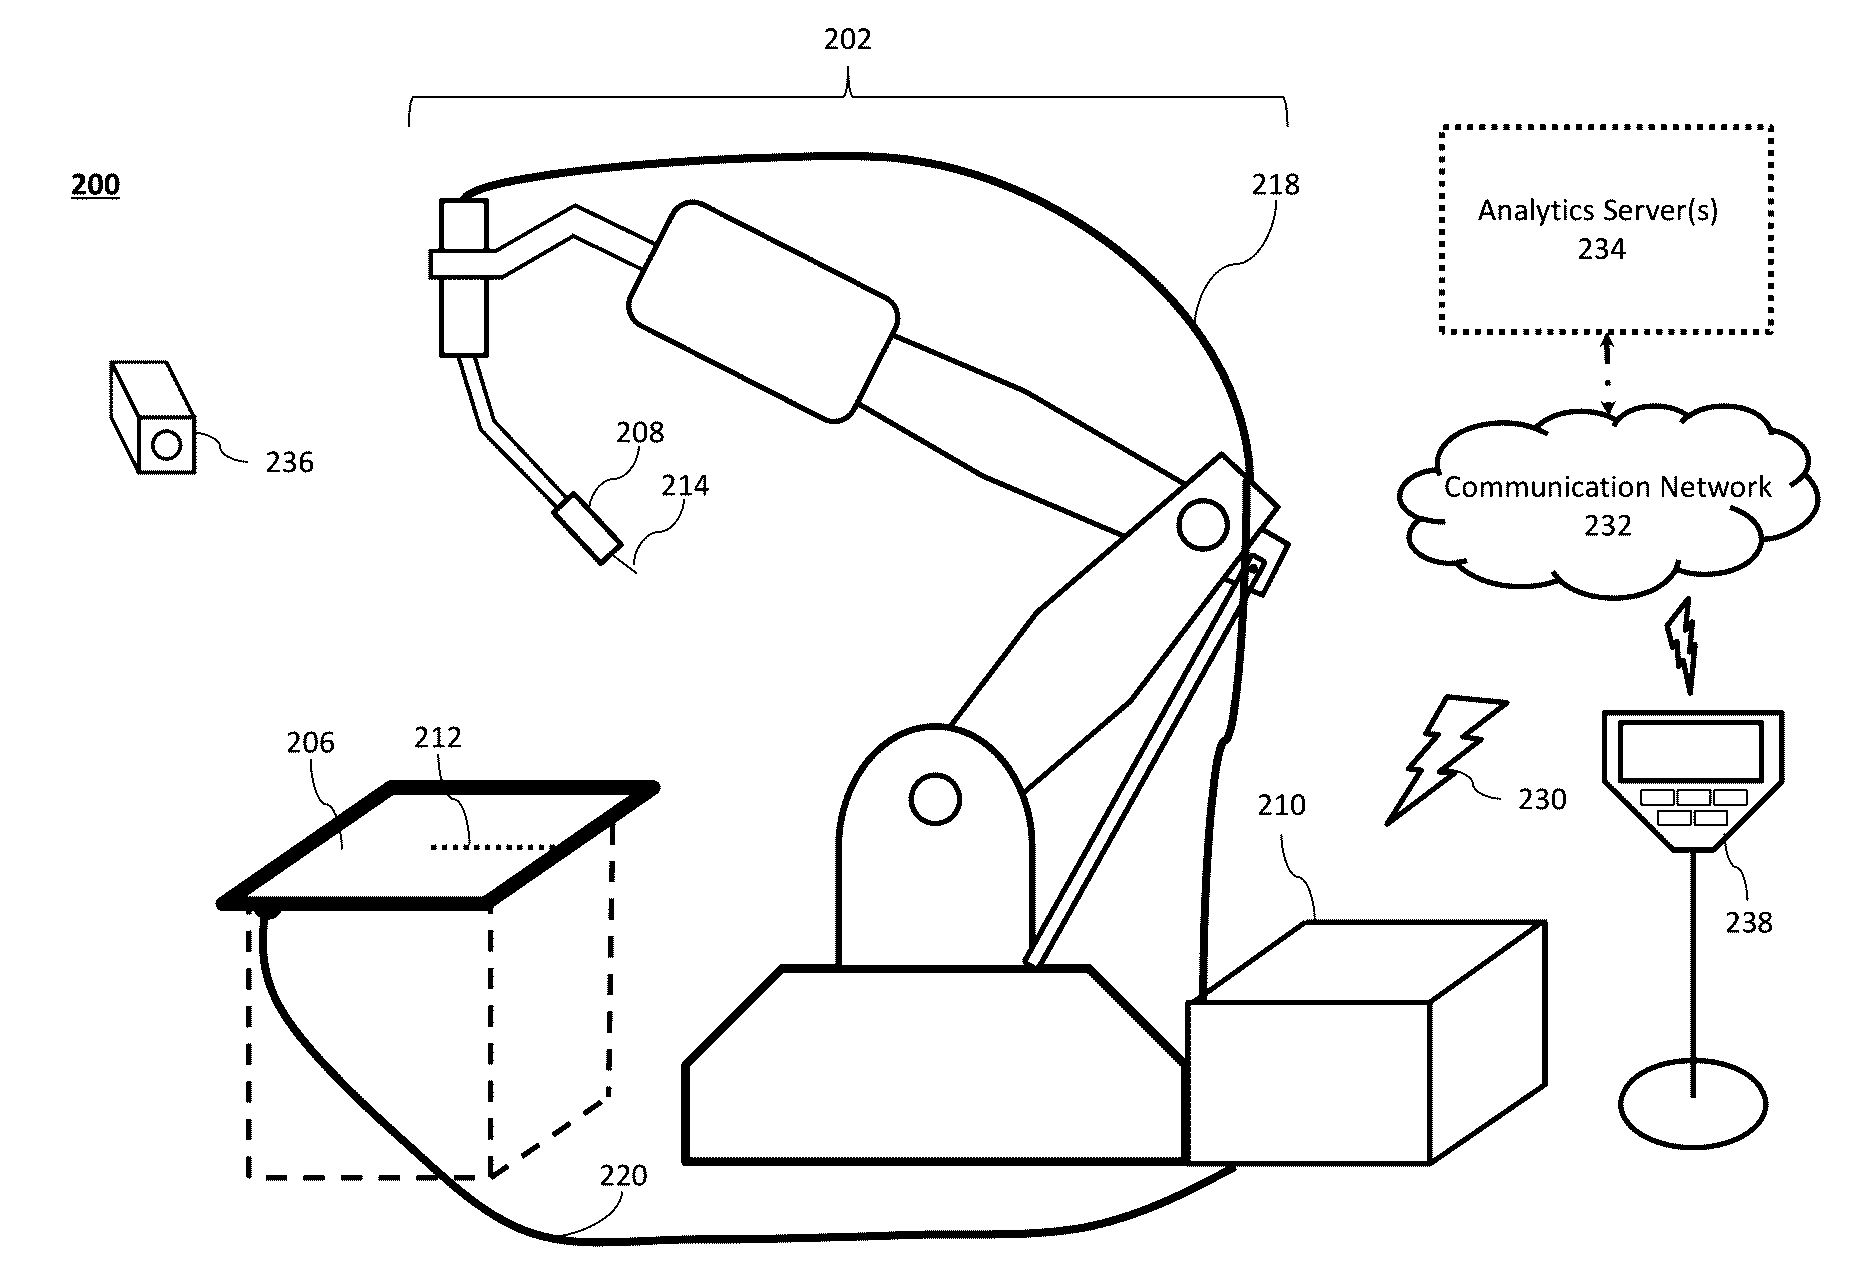 System and Method to Facilitate Welding Software as a Service